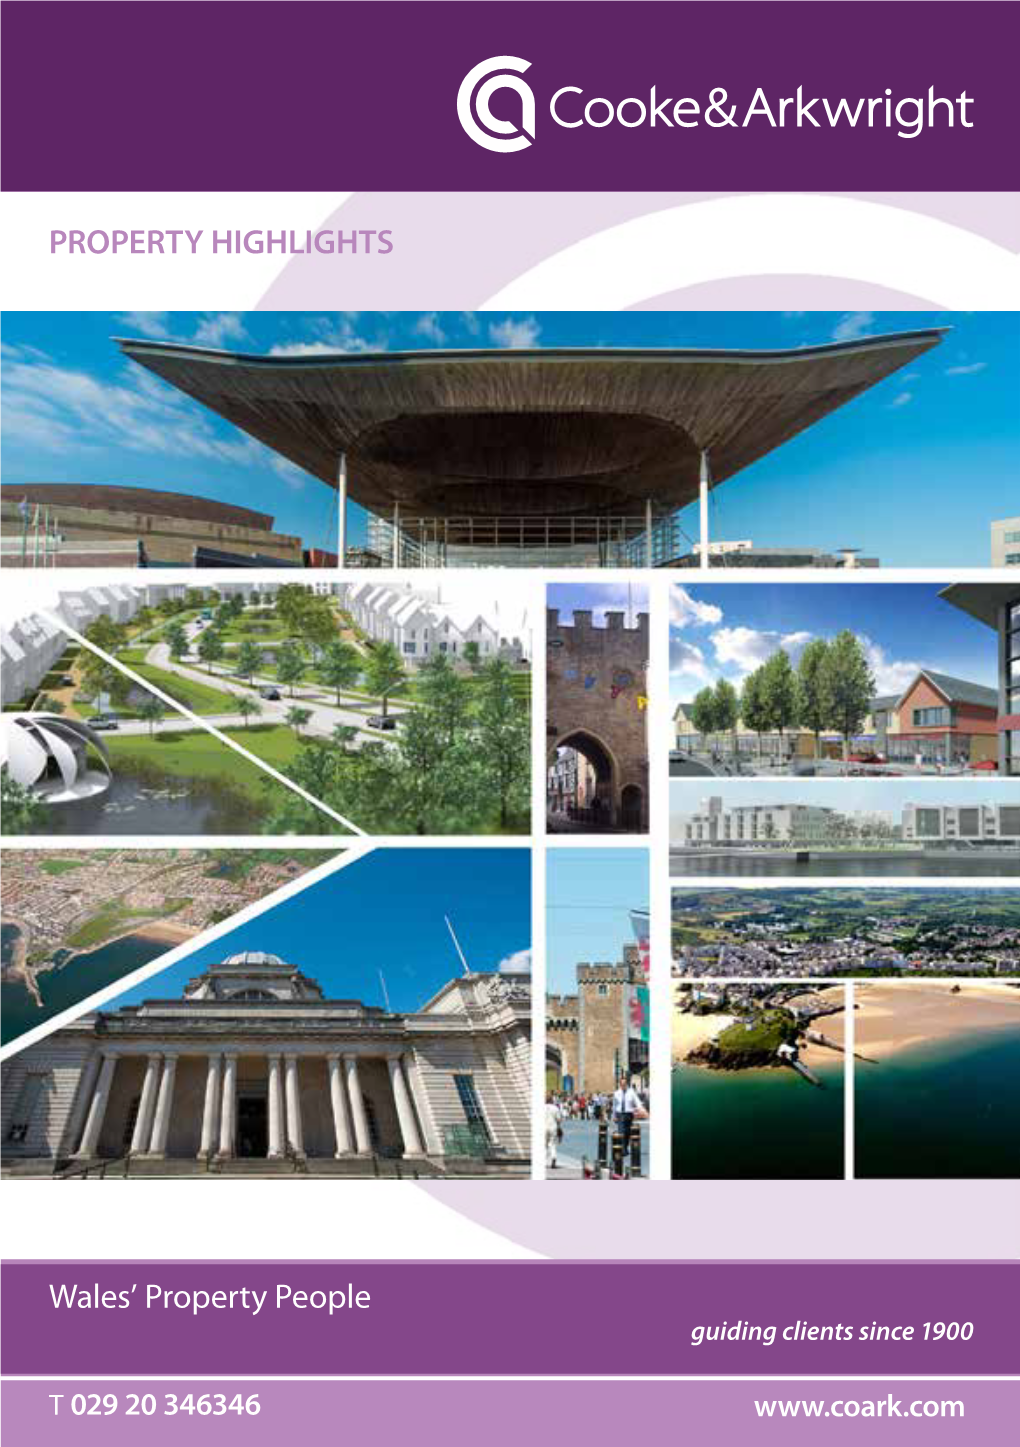 PROPERTY HIGHLIGHTS Wales' Property People